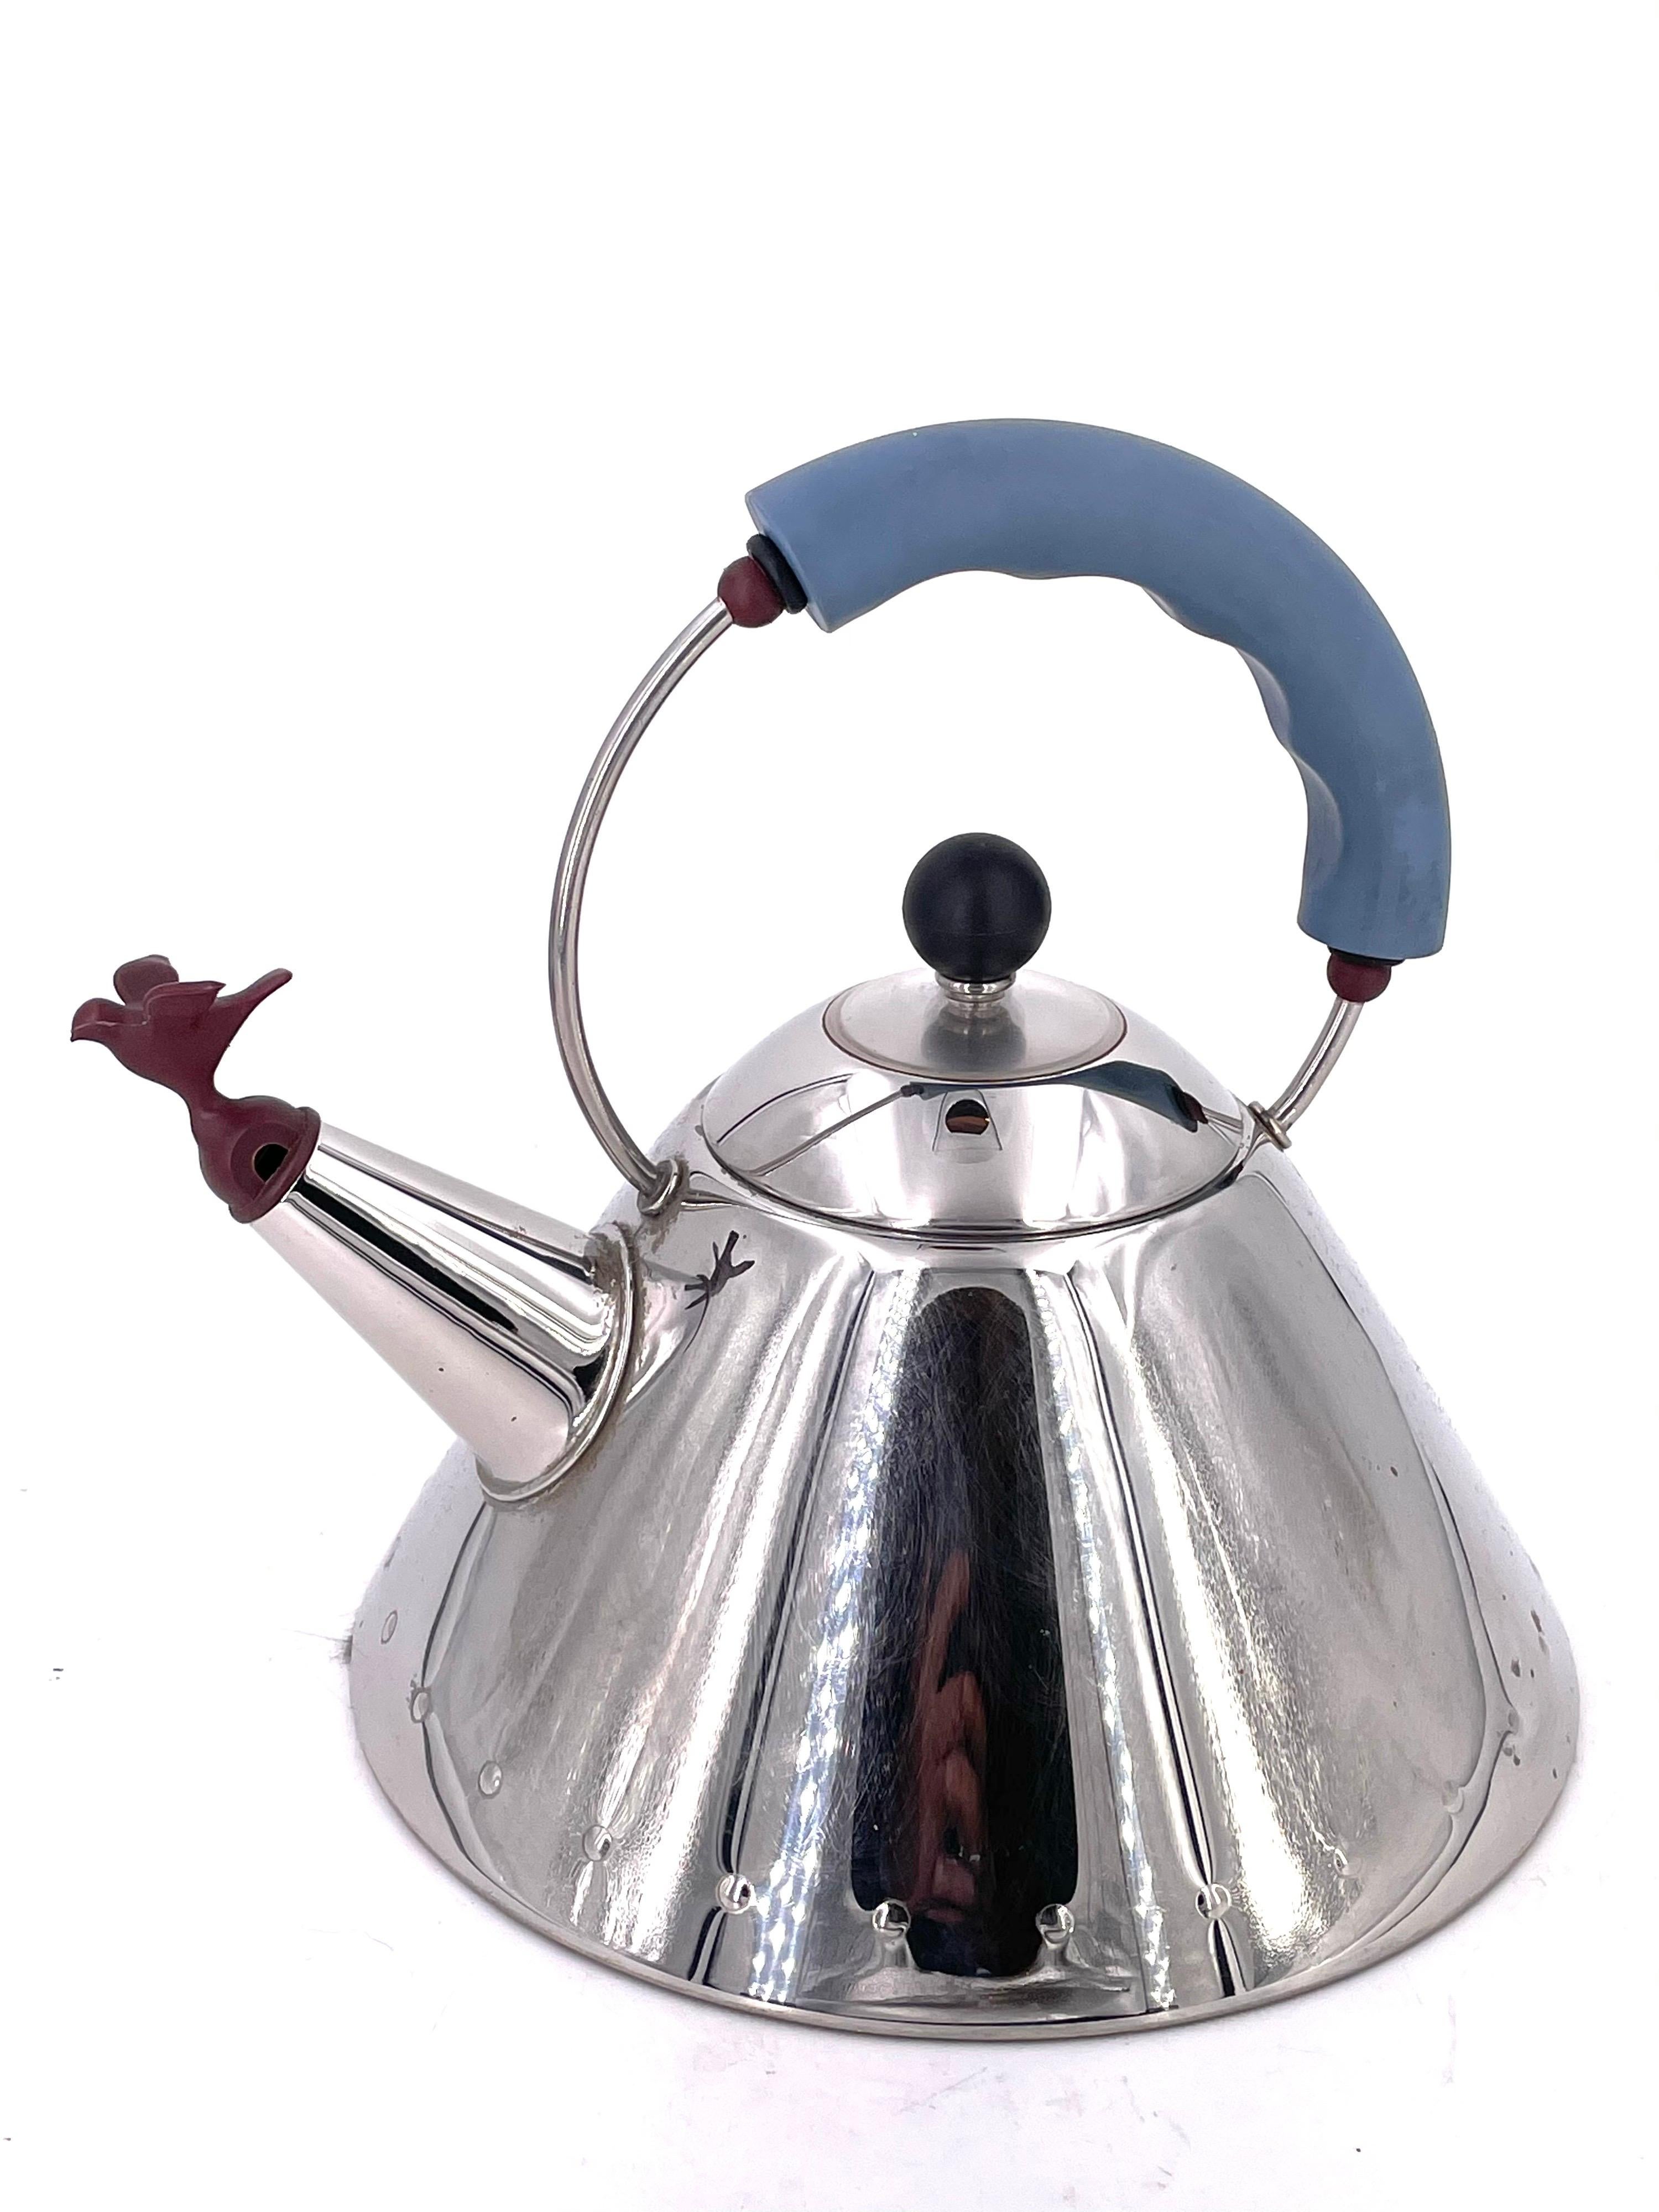 A Classic iconic teapot designed by Michael Graves for Alessi circa 1980s, made in Italy in nice original condition.